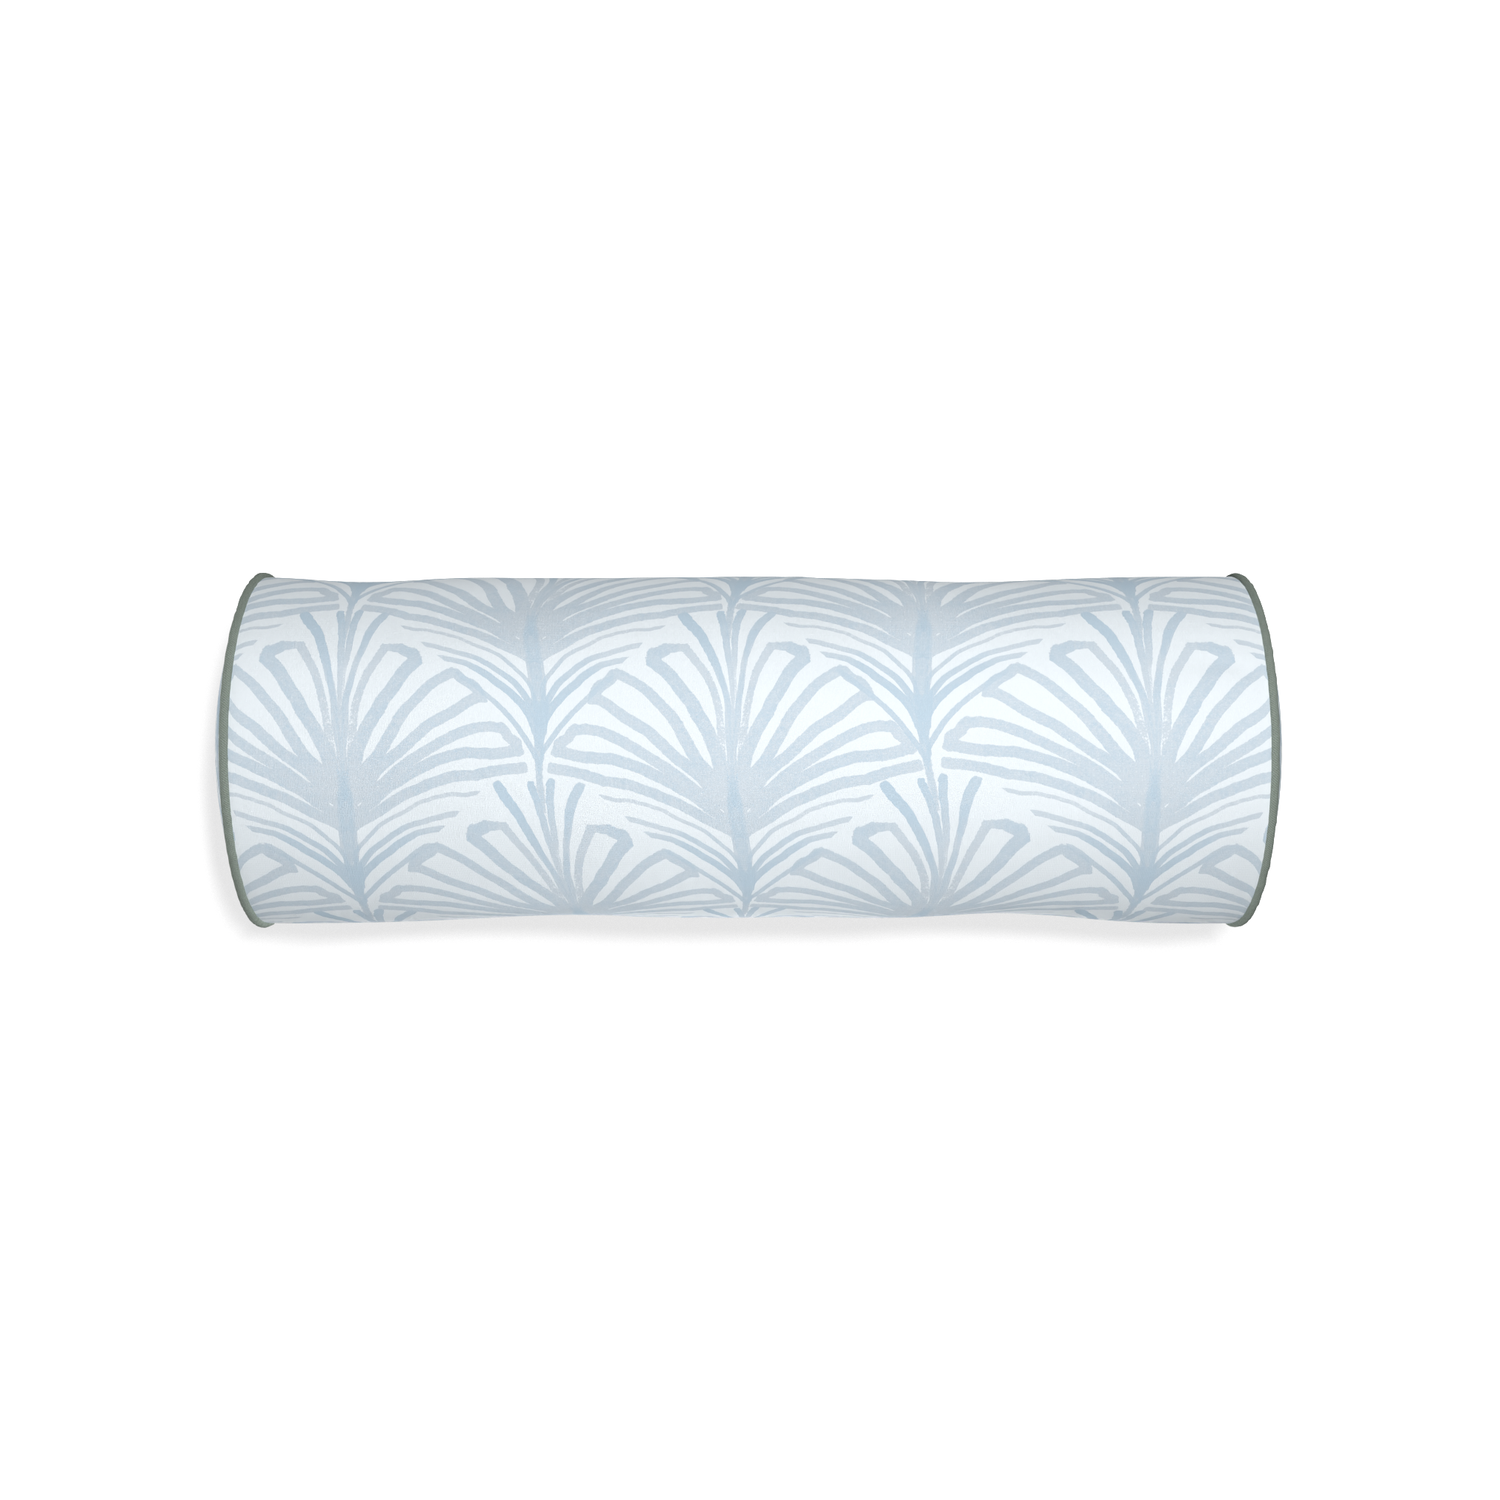 Bolster suzy sky custom sky blue palmpillow with sage piping on white background